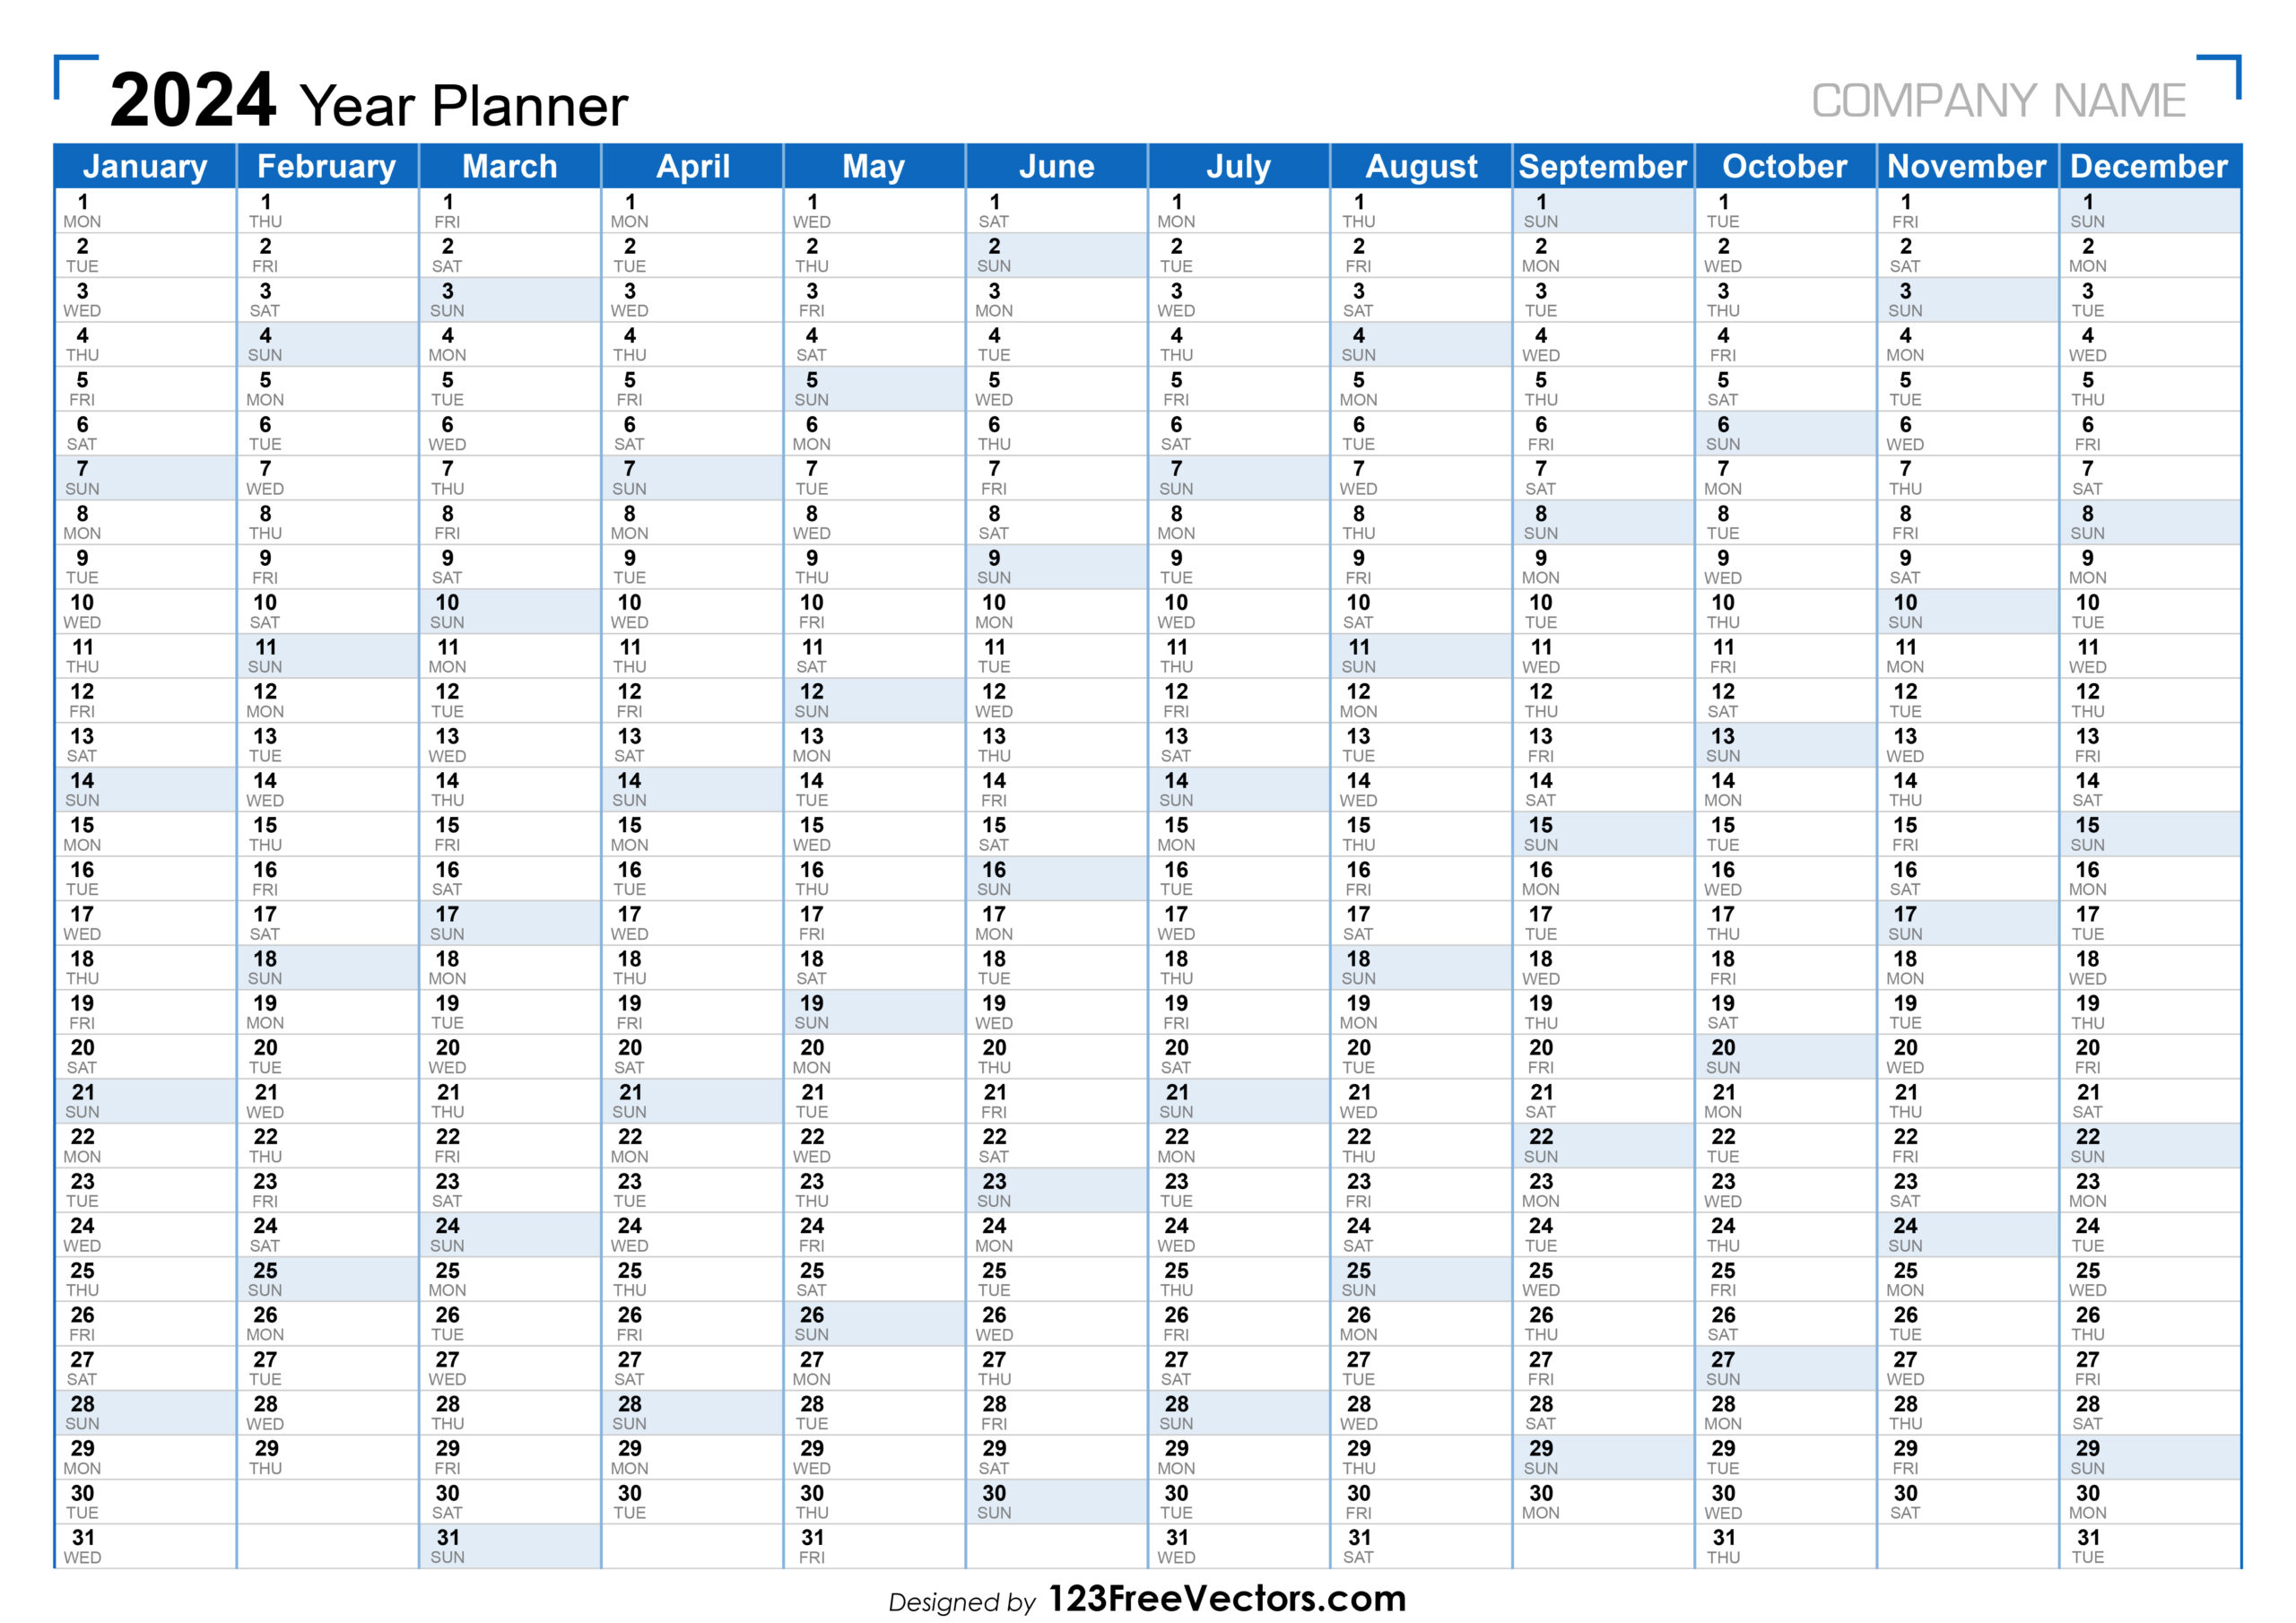 Free 2024 Planner Calendar | 2024 Yearly Calendar And Planner